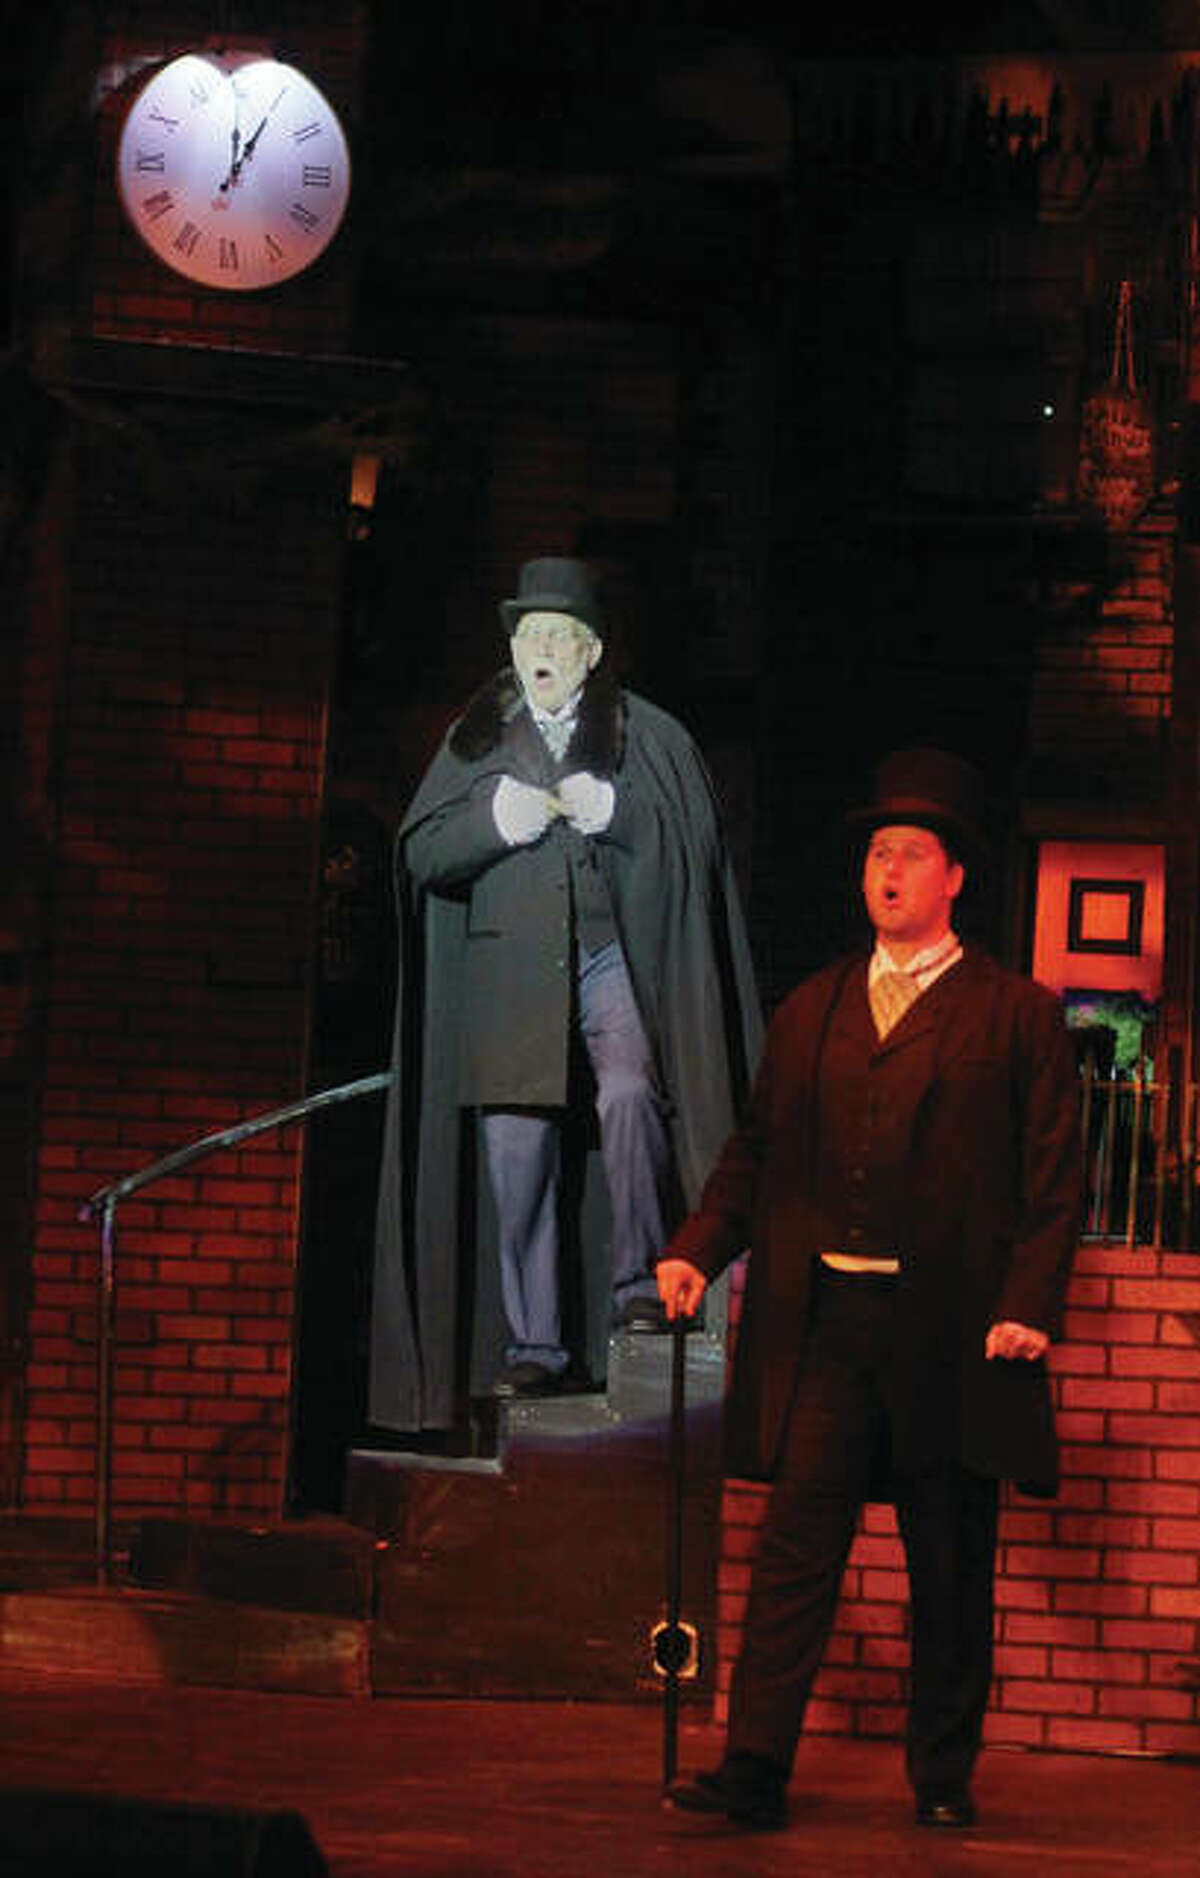 The Elder Ebenezer Scrooge, played by Don Stratton, sings with a version of his younger self, played by Nicolas Smith, while visiting Christmas scenes with the Ghost of Christmas Past in the Granite City High School production of “A Christmas Carol.” This is the 13th year of the production, which includes a cast and crew of more than 100 students and community members. The elaborate set includes a revolving stage, and several performers flying through the air. Public performances are Thursday through Saturday at 7 p.m. and 2 p.m. Sunday.